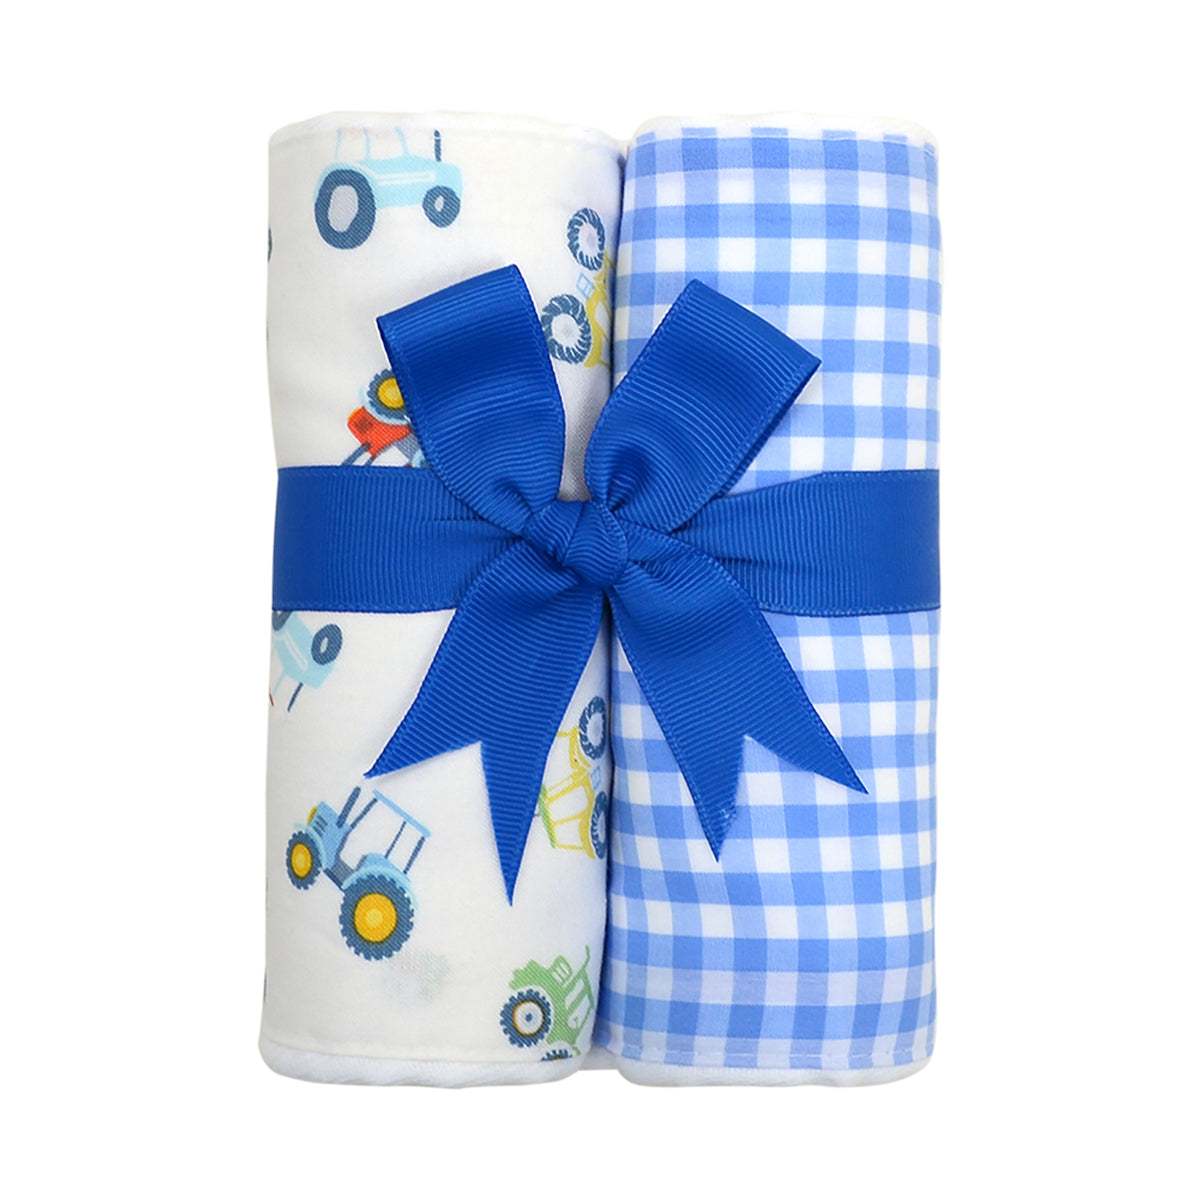 3 Marthas Tractor and Blue Check Fabric Burp Pads Gift Set